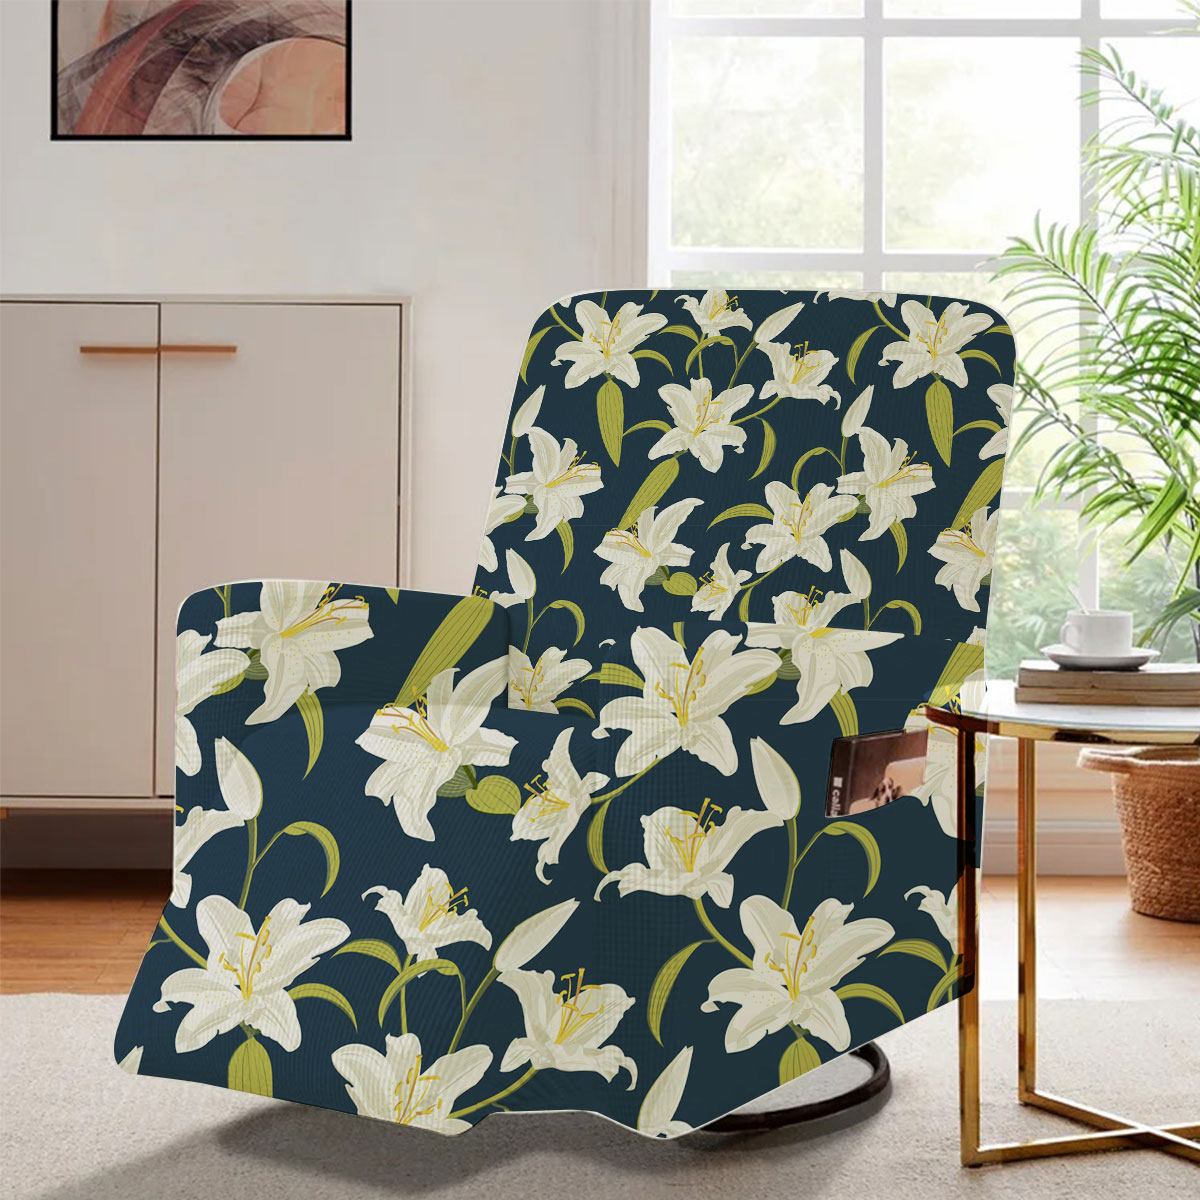 Lily Seamless Pattern On Blue Background Recliner Slipcover